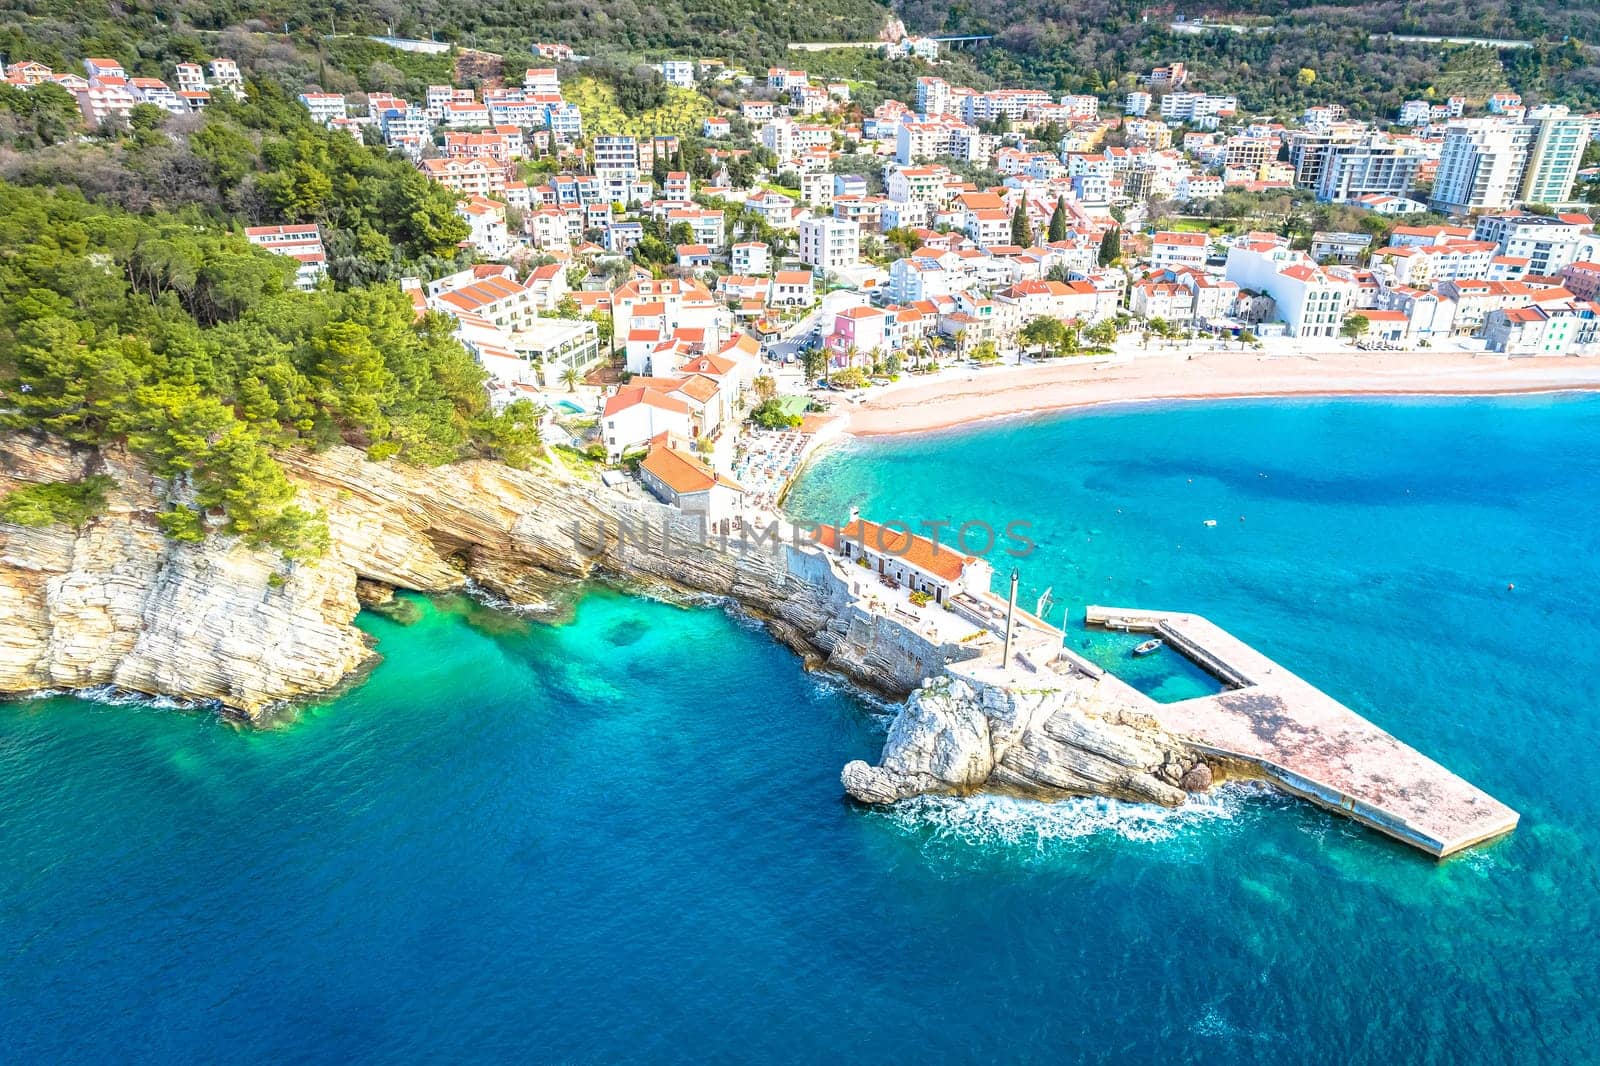 Town of Petrovac beach and coastline aerial view, archipelago of Montenegro